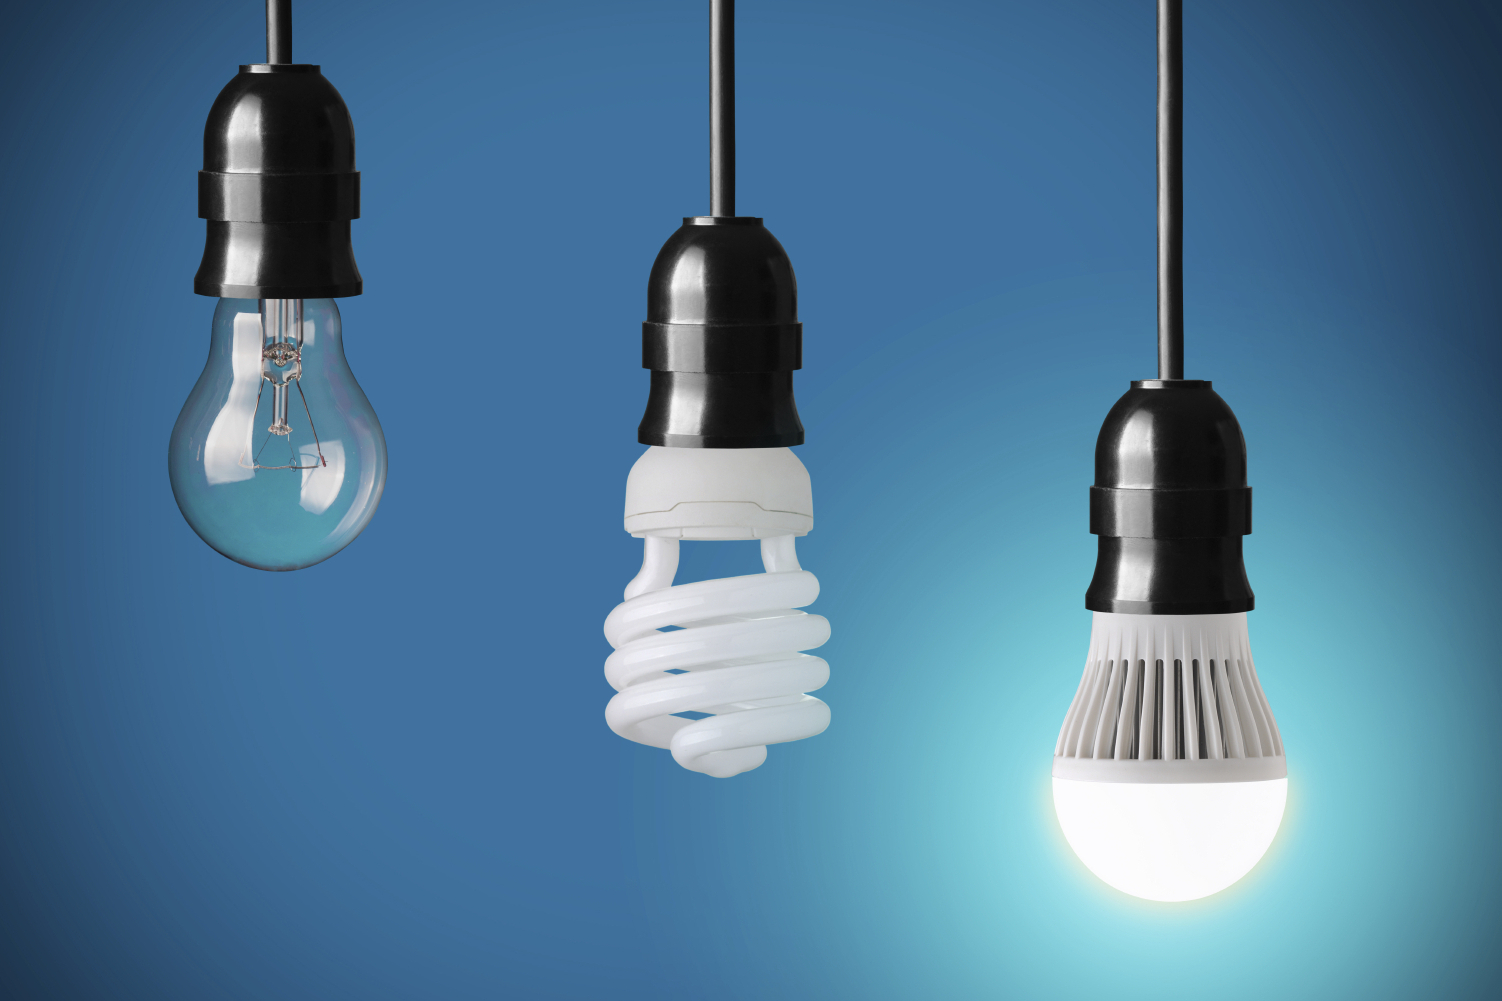 Watts The Deal? Demystifying LEDs, CFLs, Halogens And More : NPR